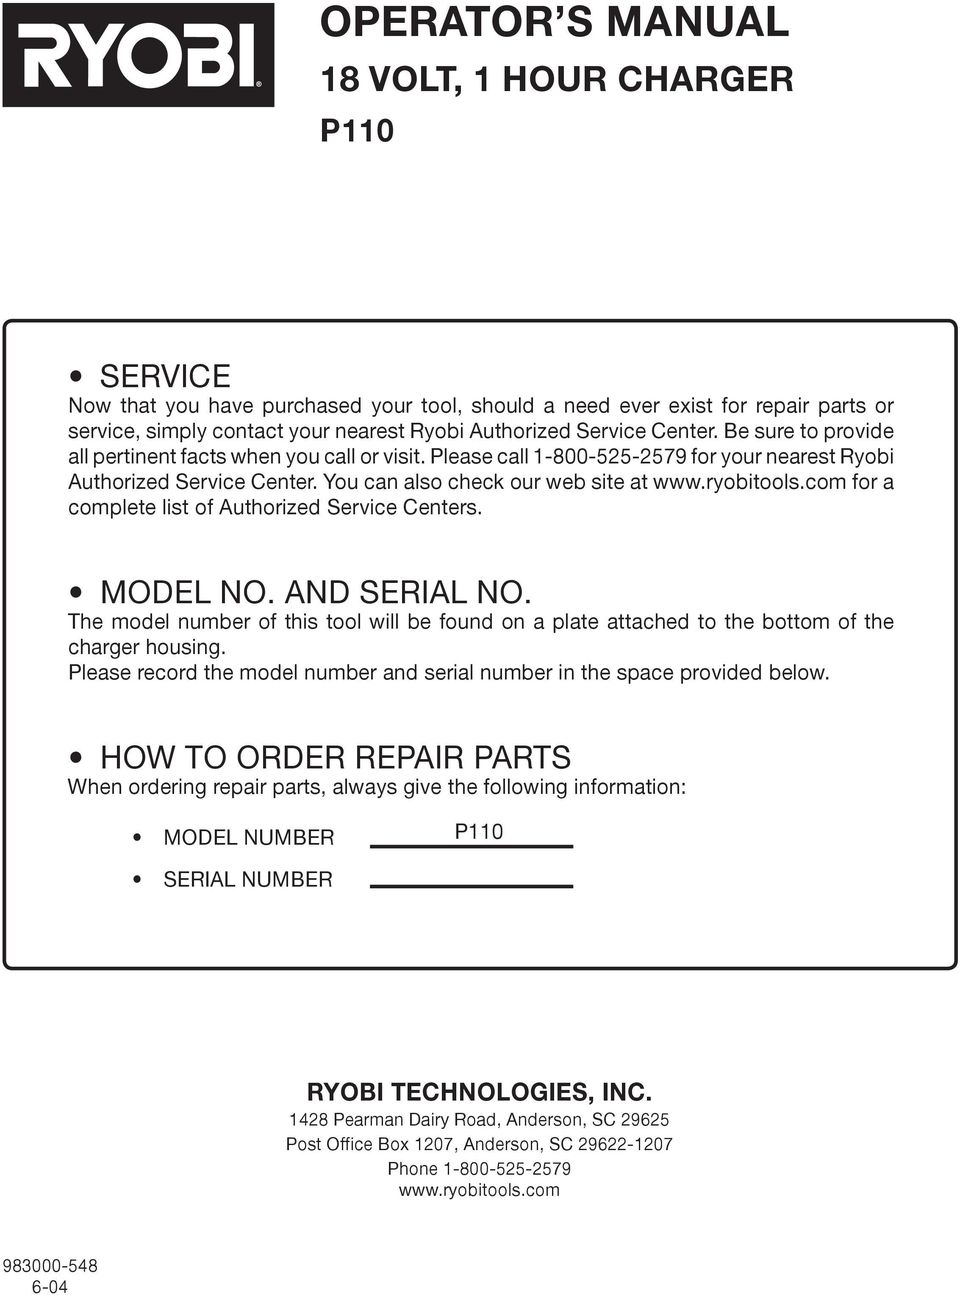 ryobitools.com for a complete list of Authorized Service Centers. MODEL NO. AND SERIAL NO. The model number of this tool will be found on a plate attached to the bottom of the charger housing.